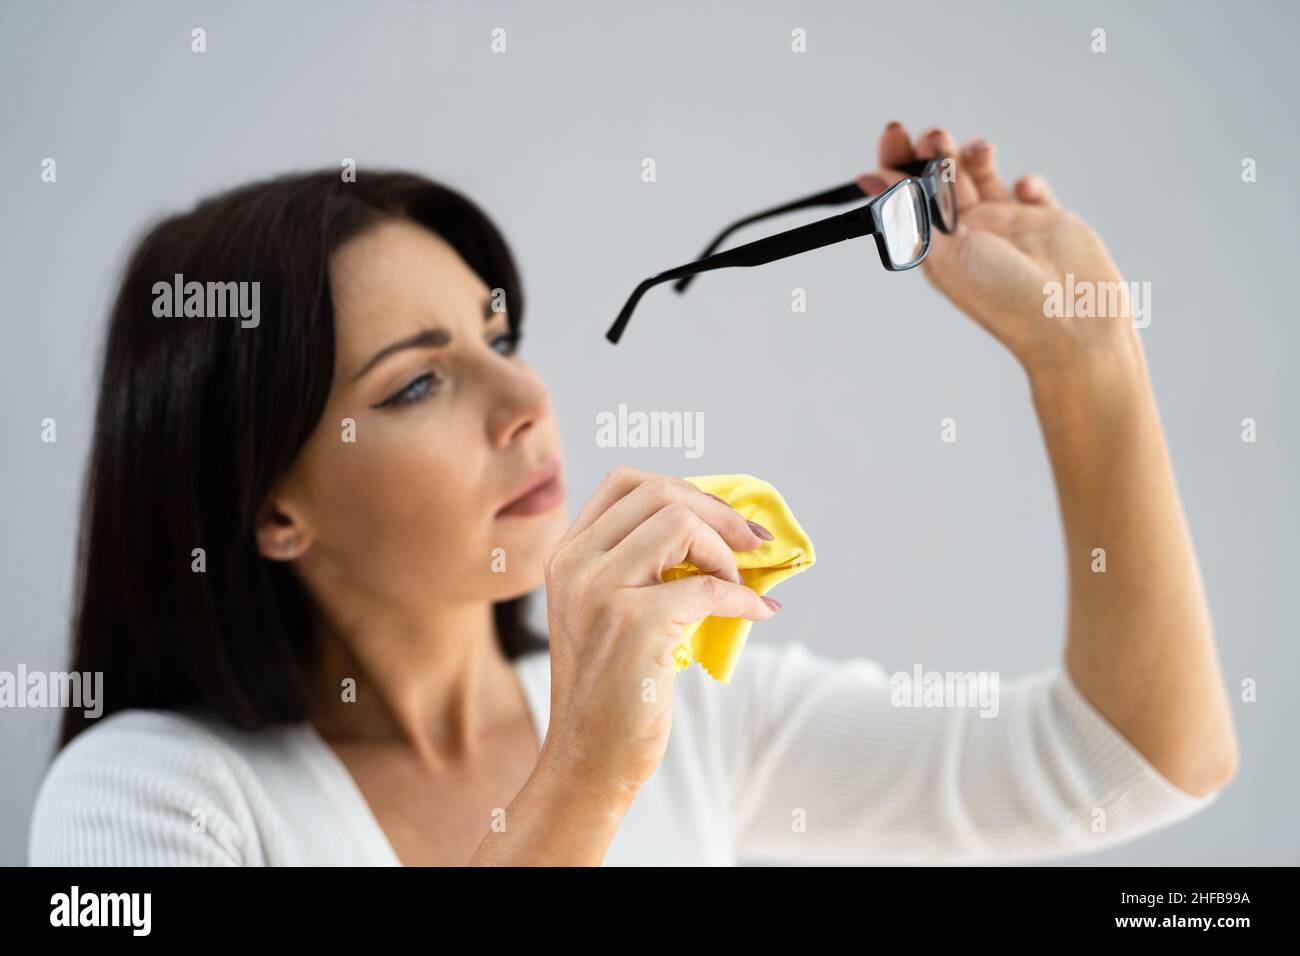 Obsessive Compulsive Perfectionist With OCD Disorder Cleaning Glasses Stock Photo